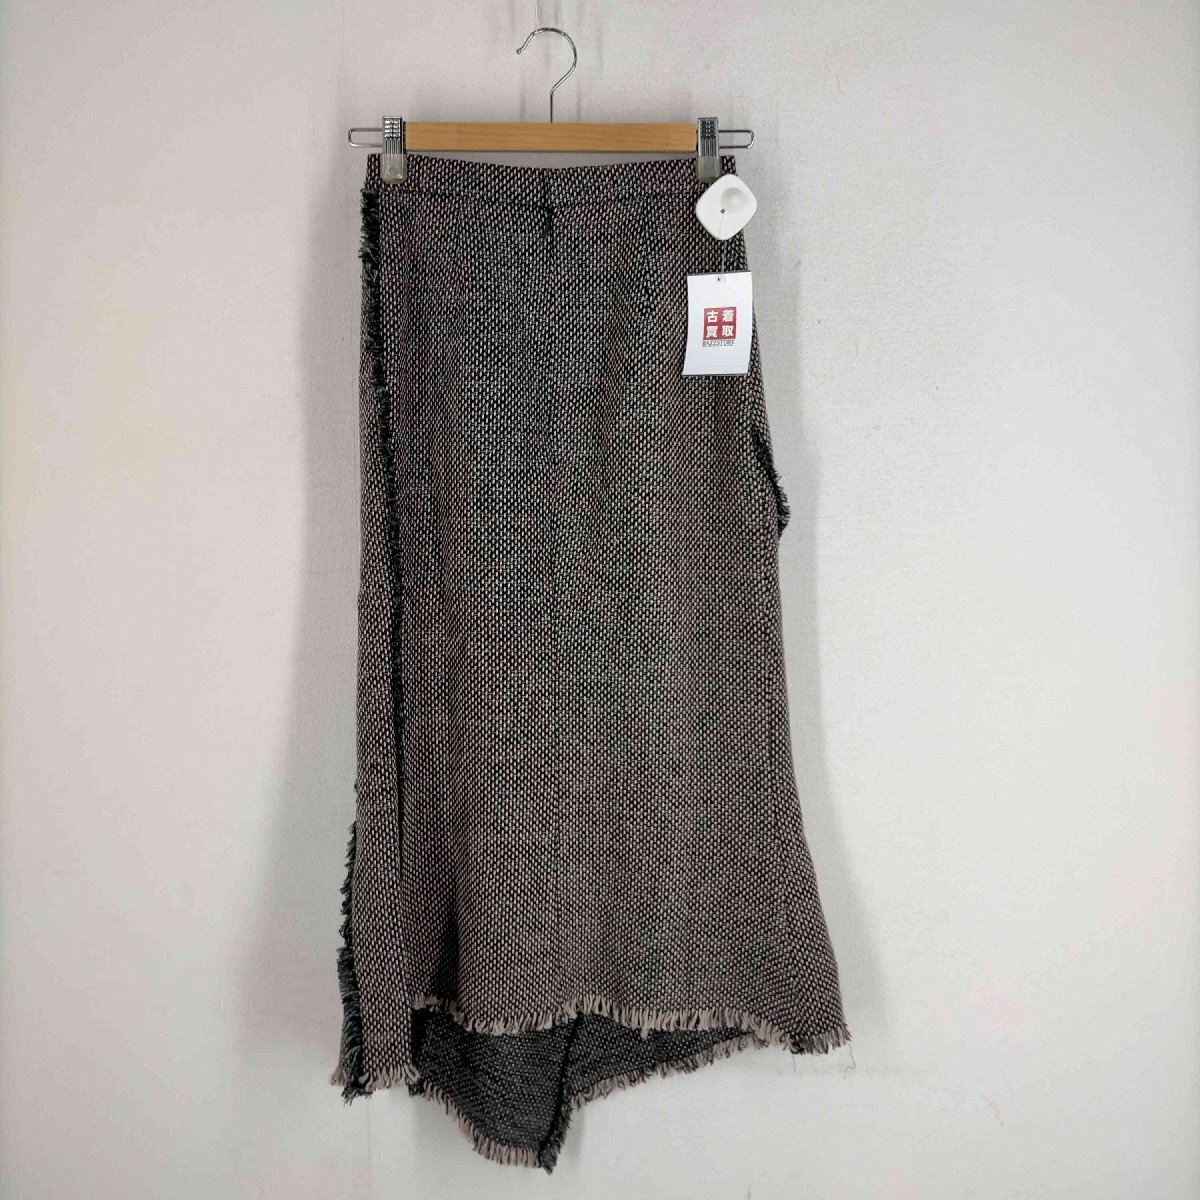 USED古着(ユーズドフルギ) L'Or Spiral Tweed Skirt レディース S 中古 古着 0734_画像2